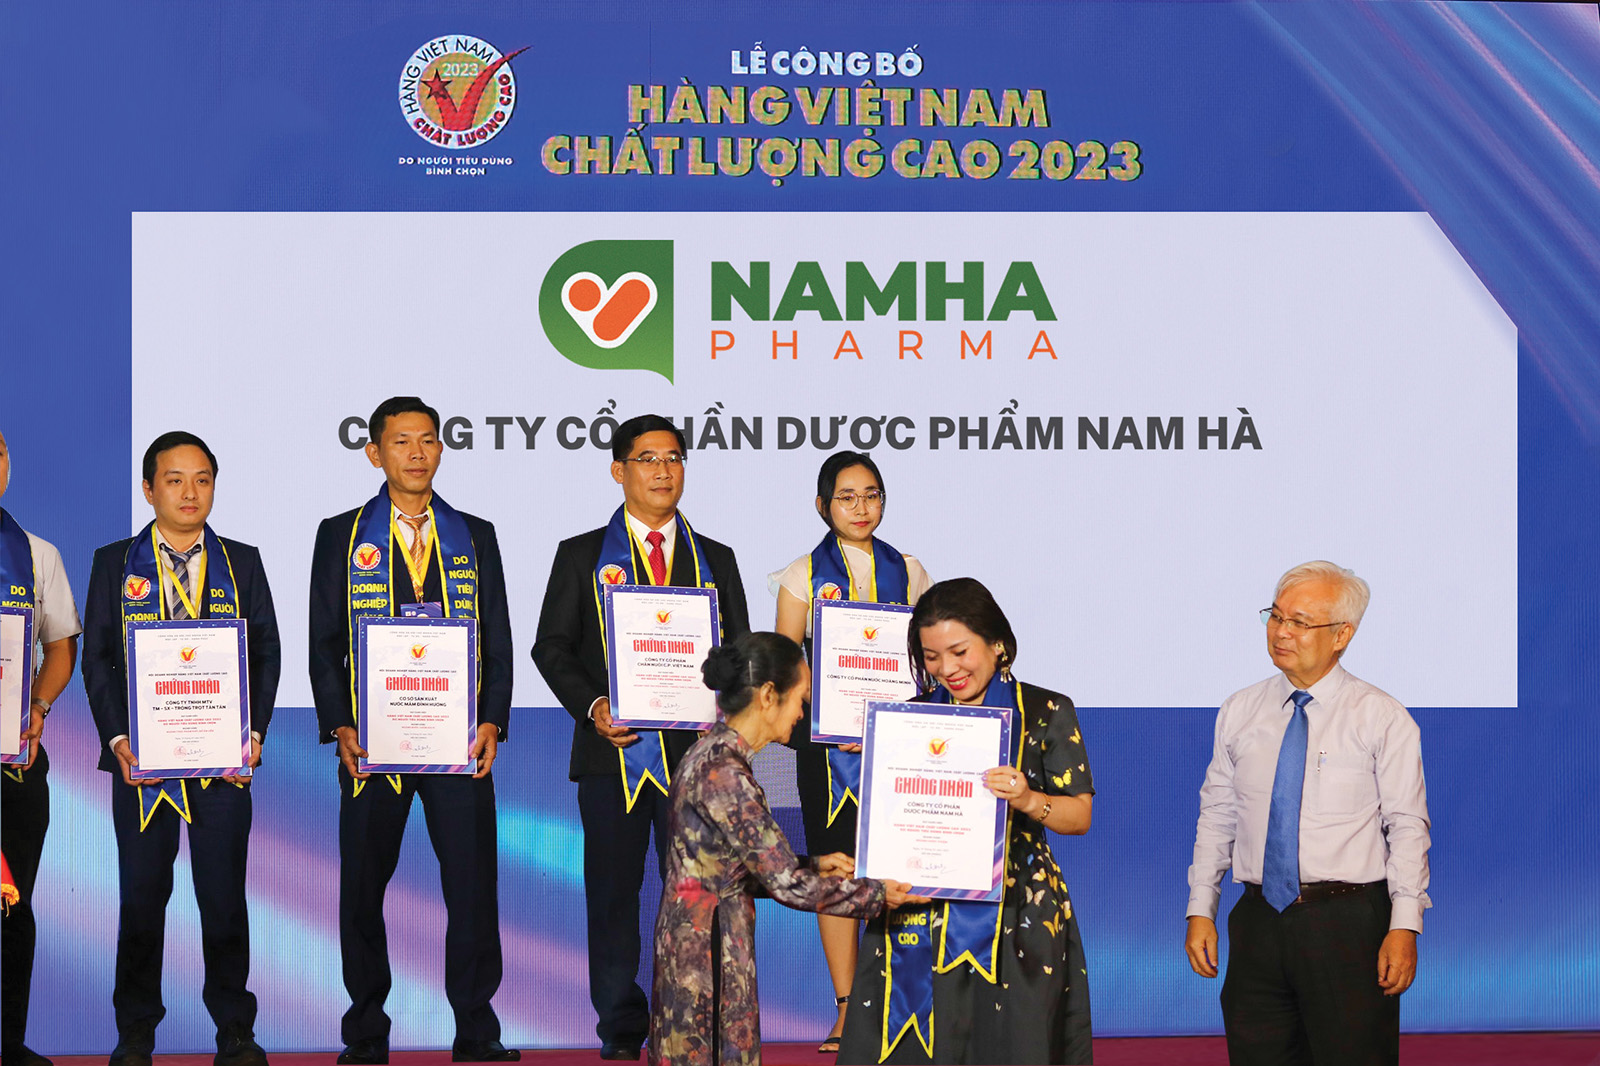 Nam Ha Pharmaceutical Consistent With the “Green Pharmaceutical For A Healthy Life” Motto